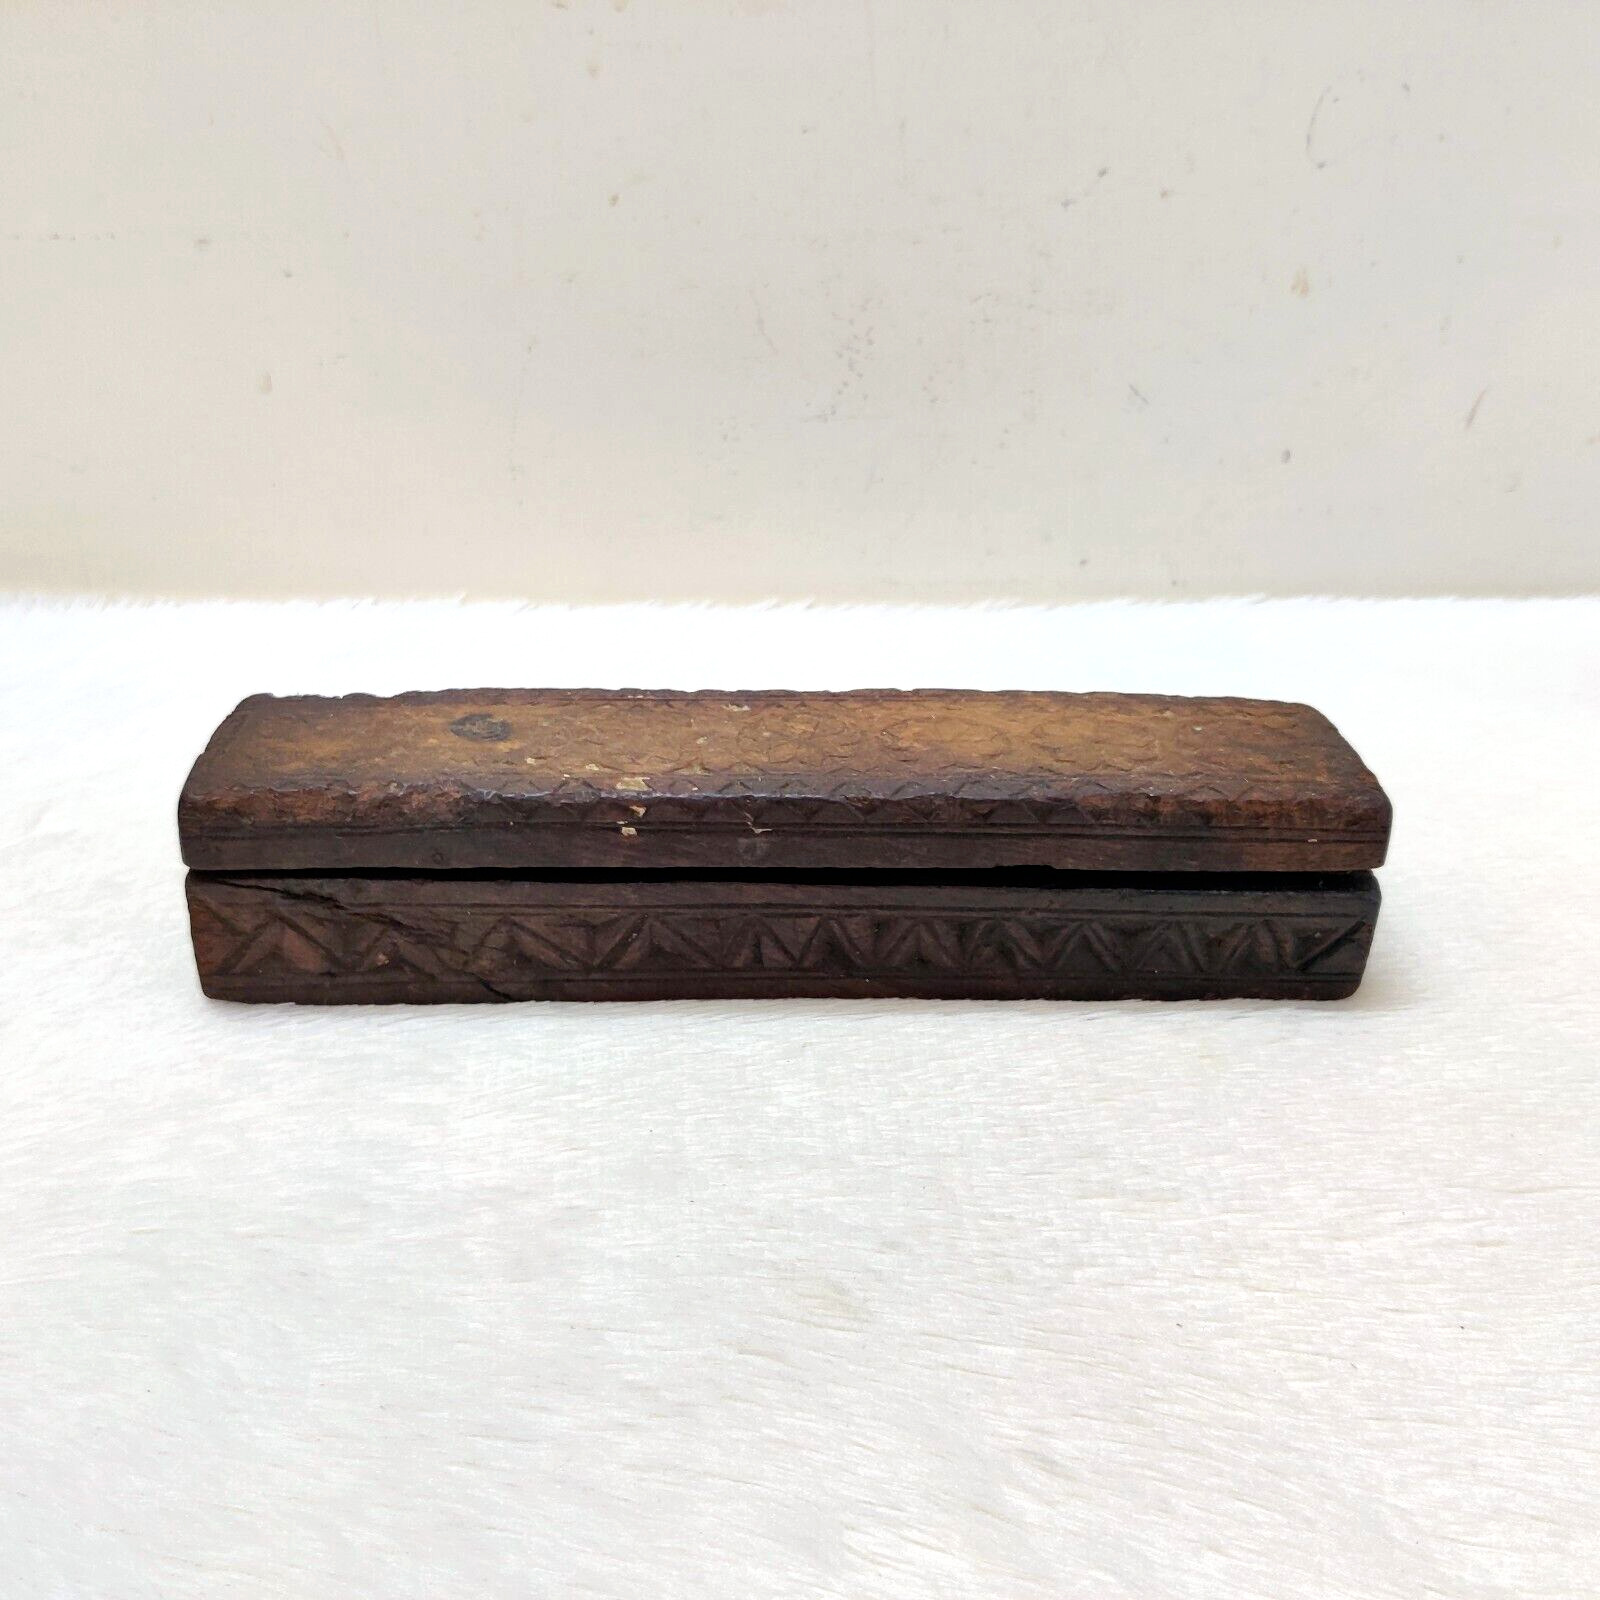 19C Vintage Handcrafted Wooden Pen Pencil Silver Inkwell Holder Box Collectible